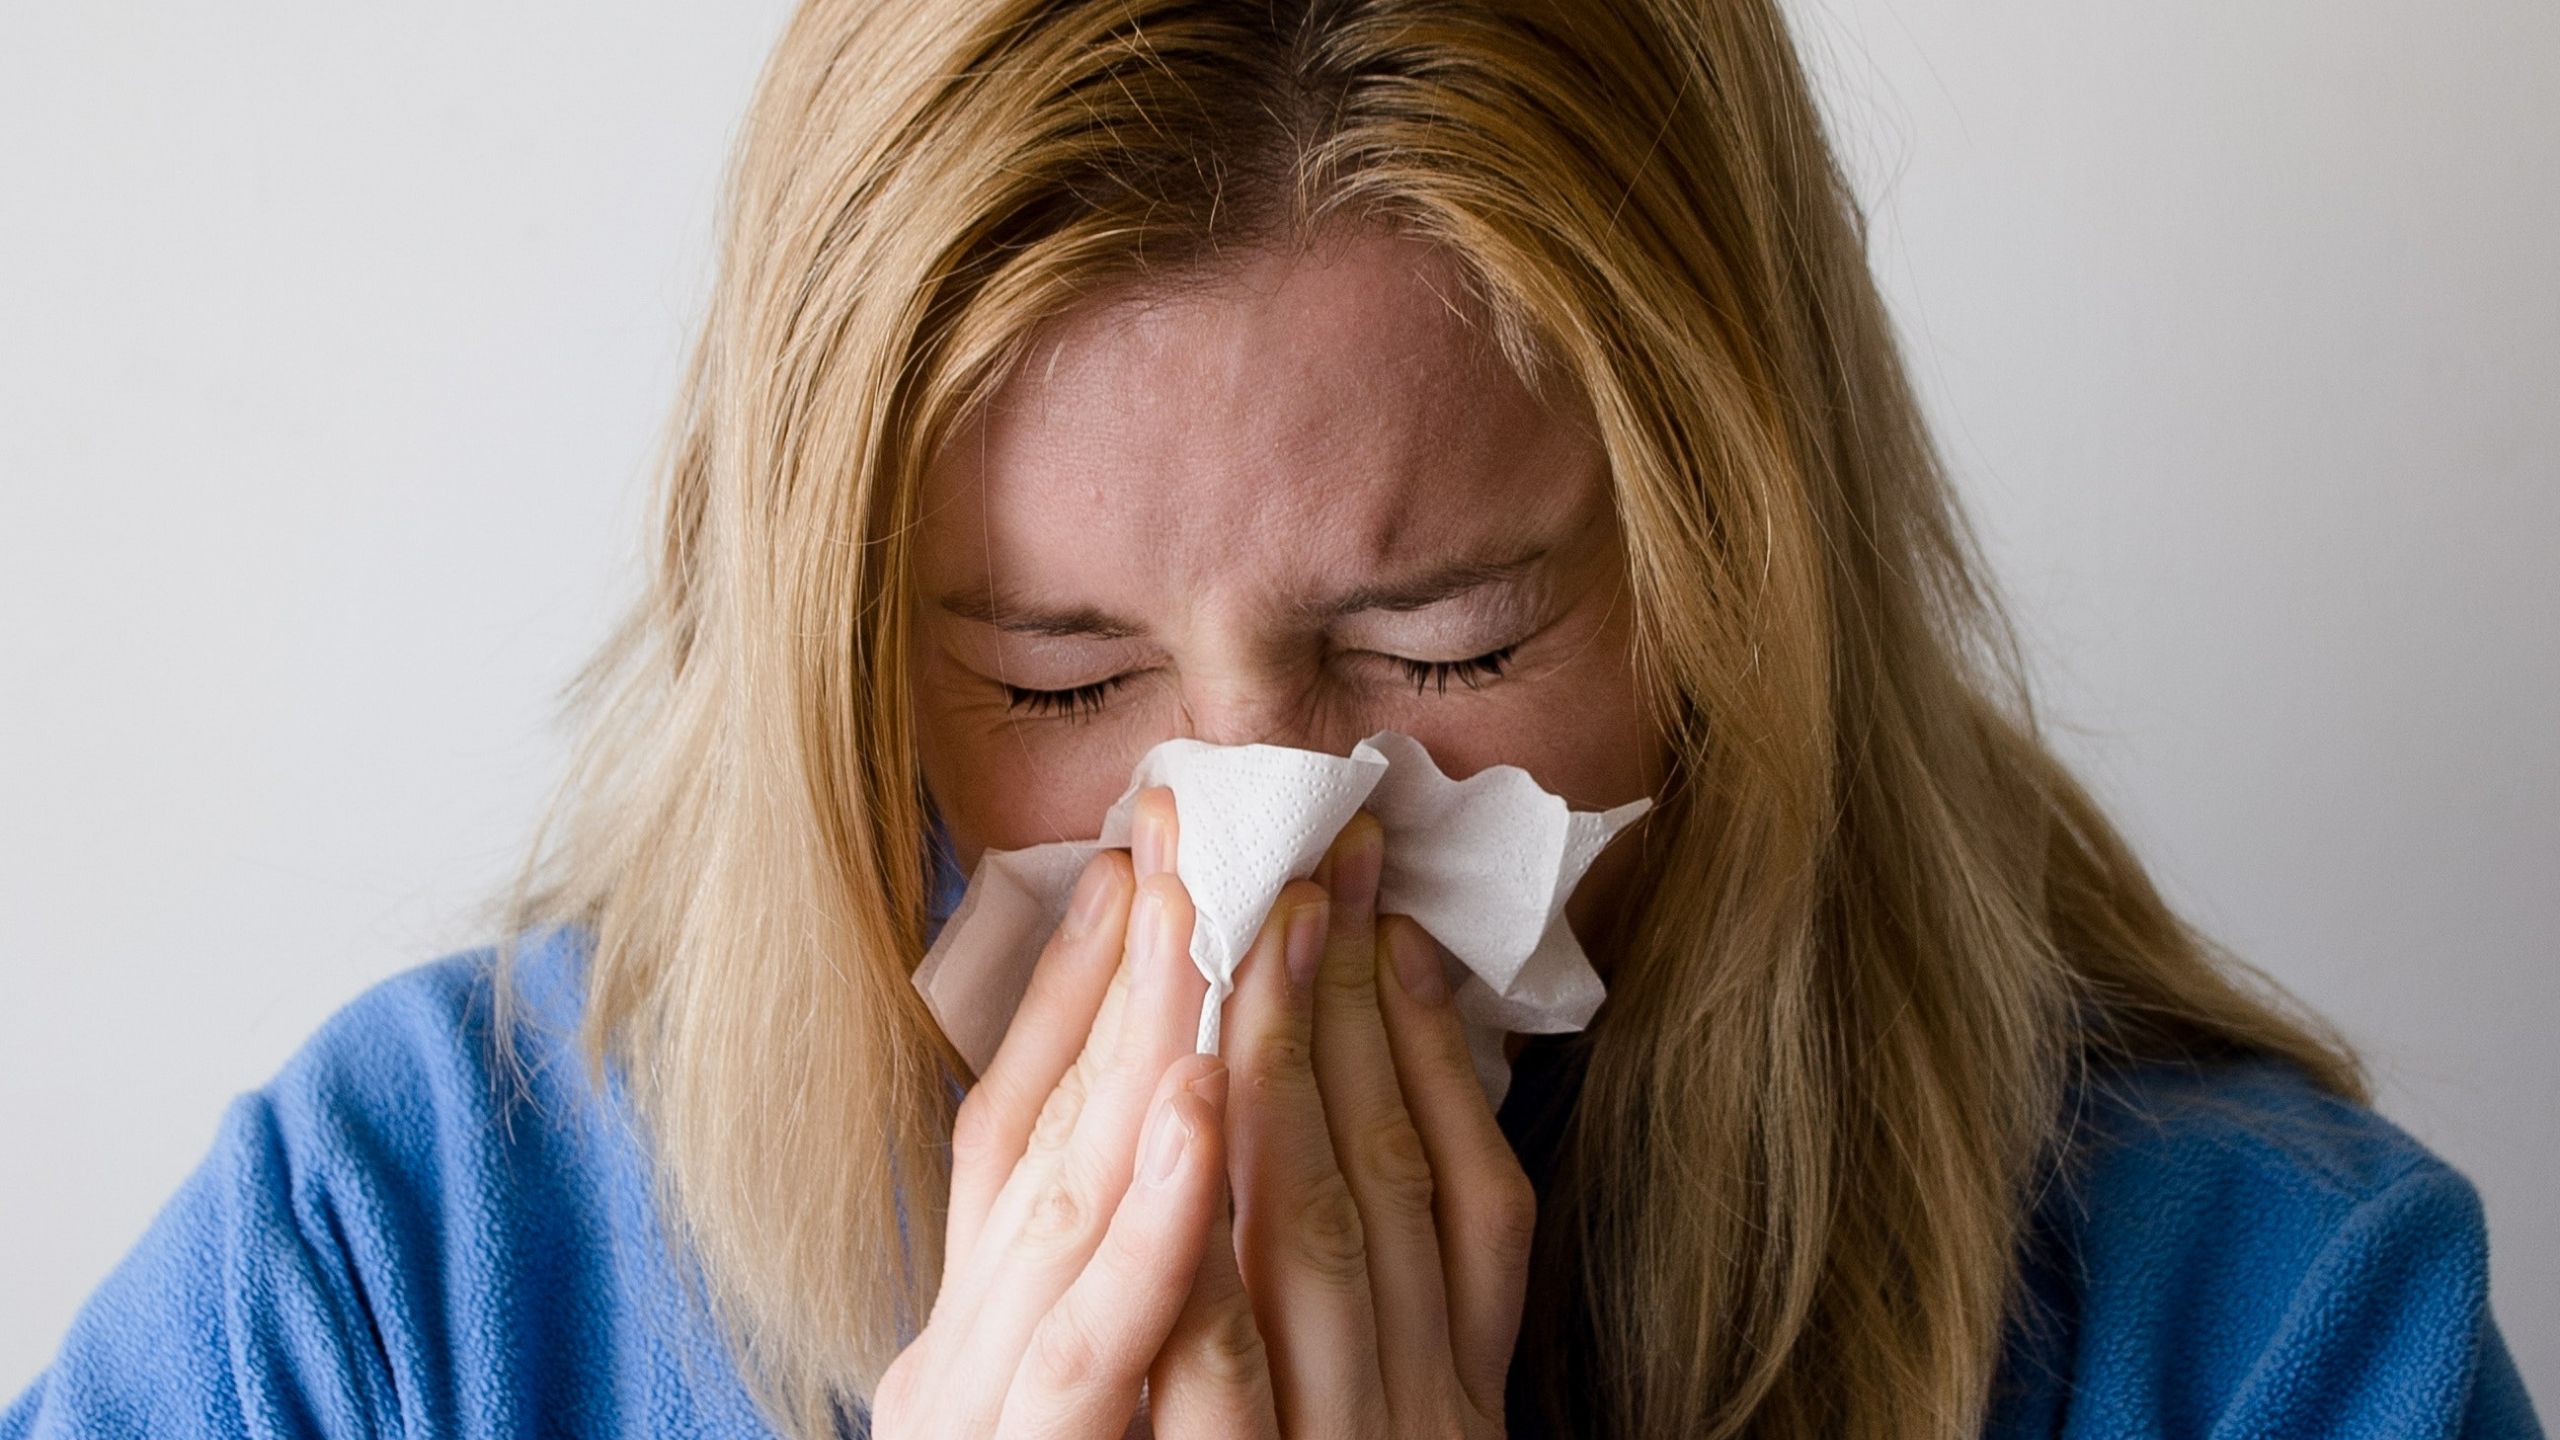 You catch a cold when it’s cold outside and more myths about the common cold